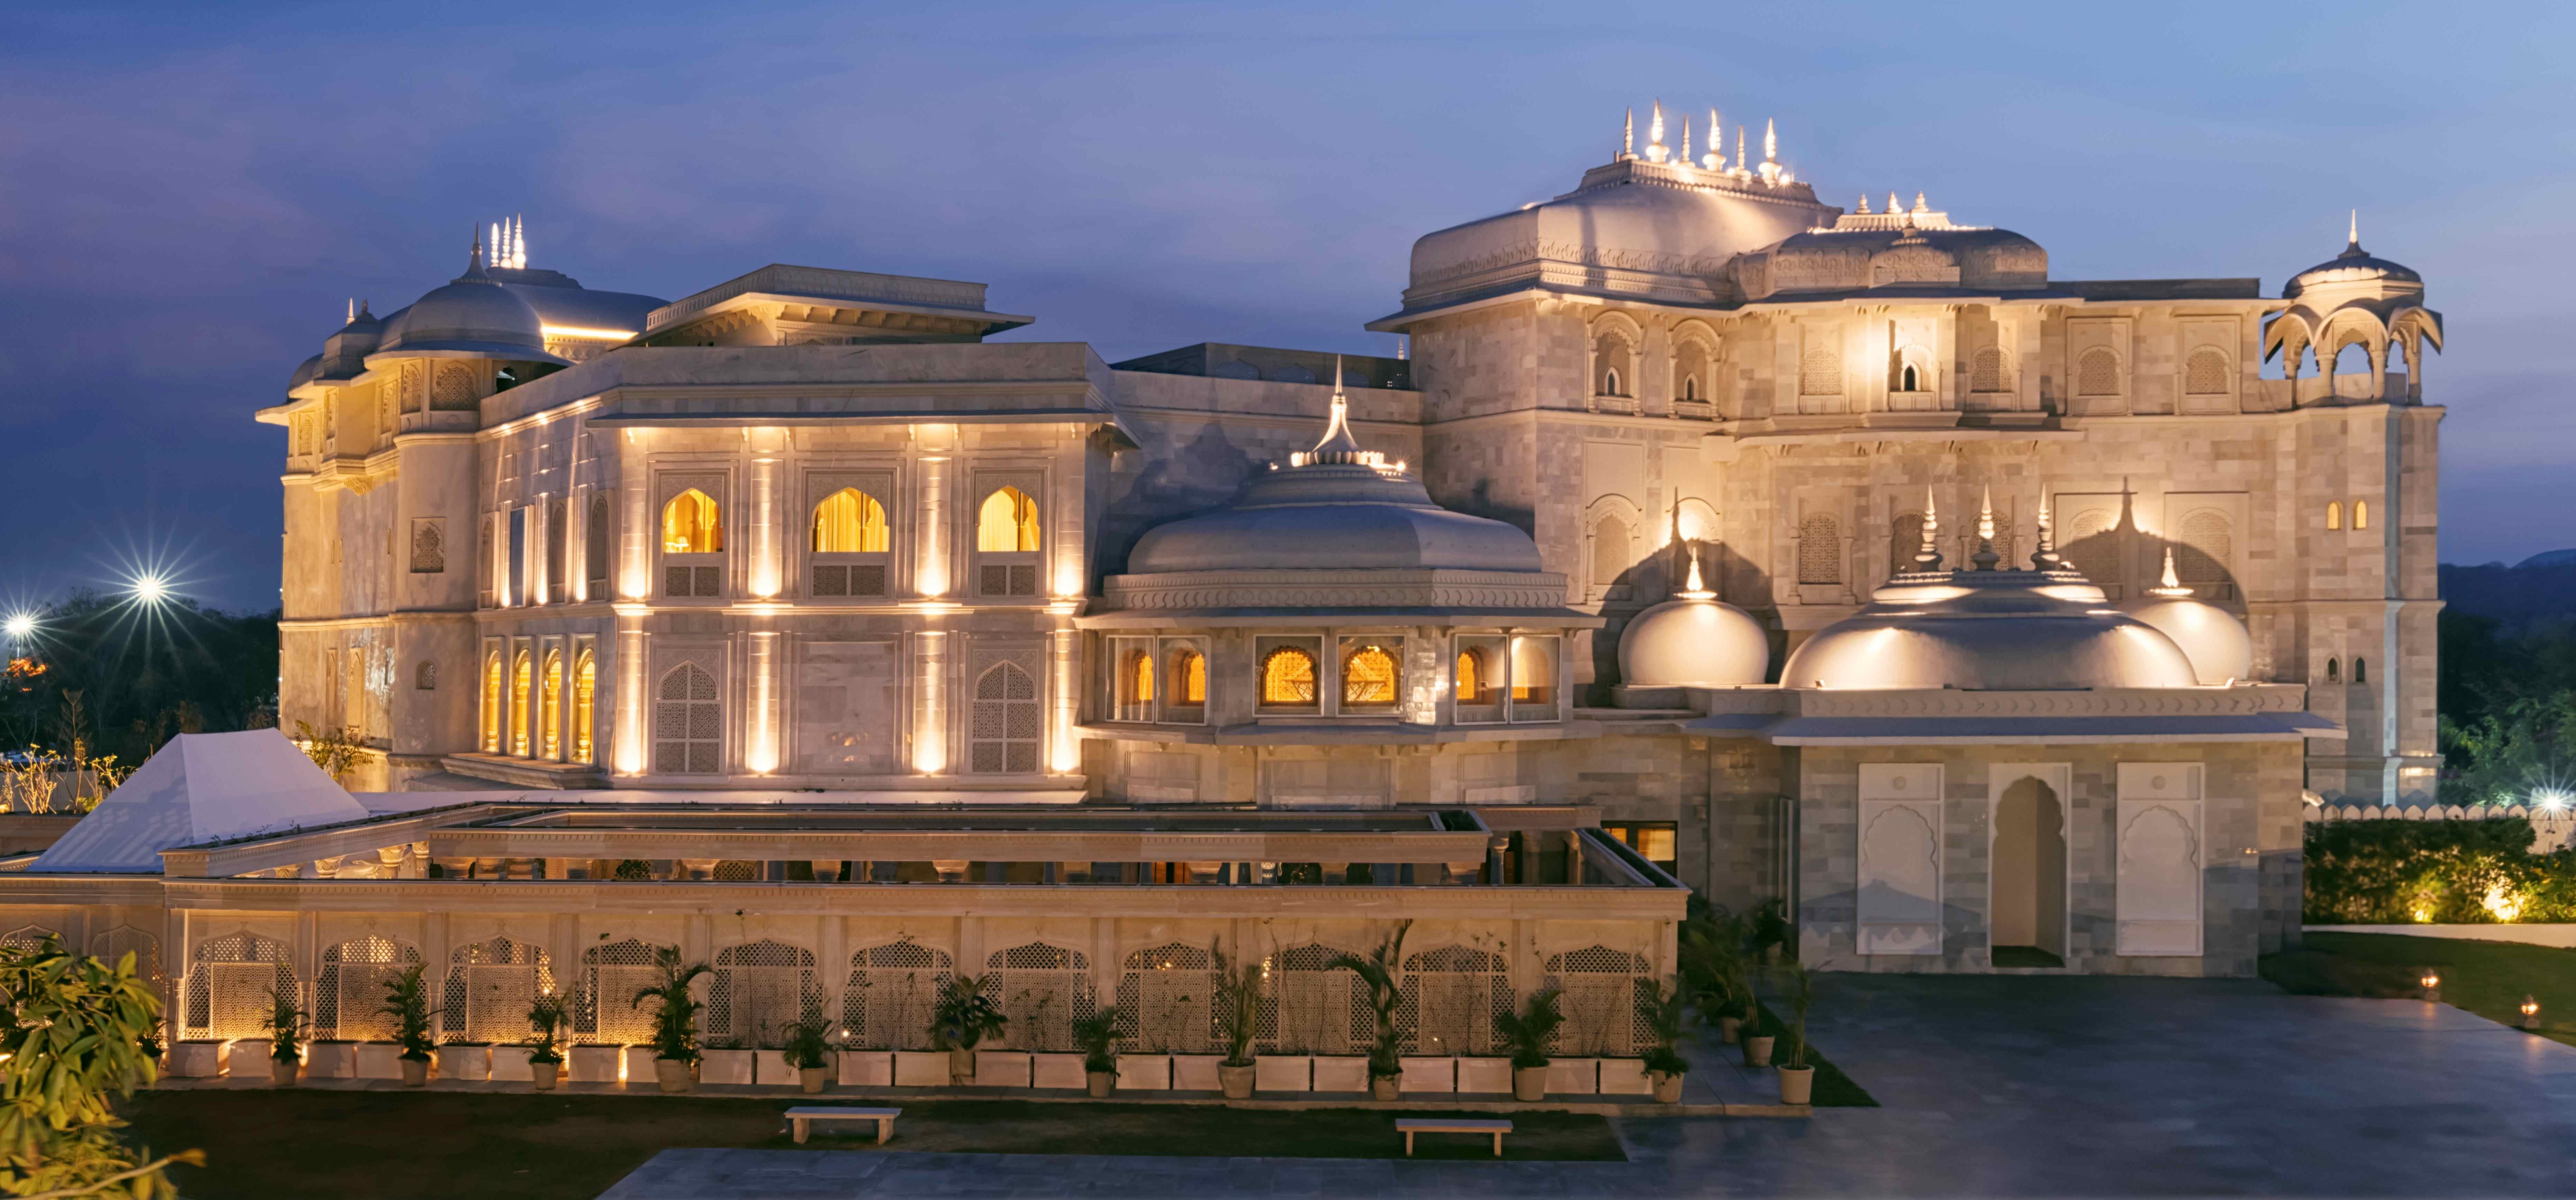 Raffles Hotels & Resorts has made its mark in Jaipur, offering bespoke service and captivating glamour to India’s ''''Pink City''''.